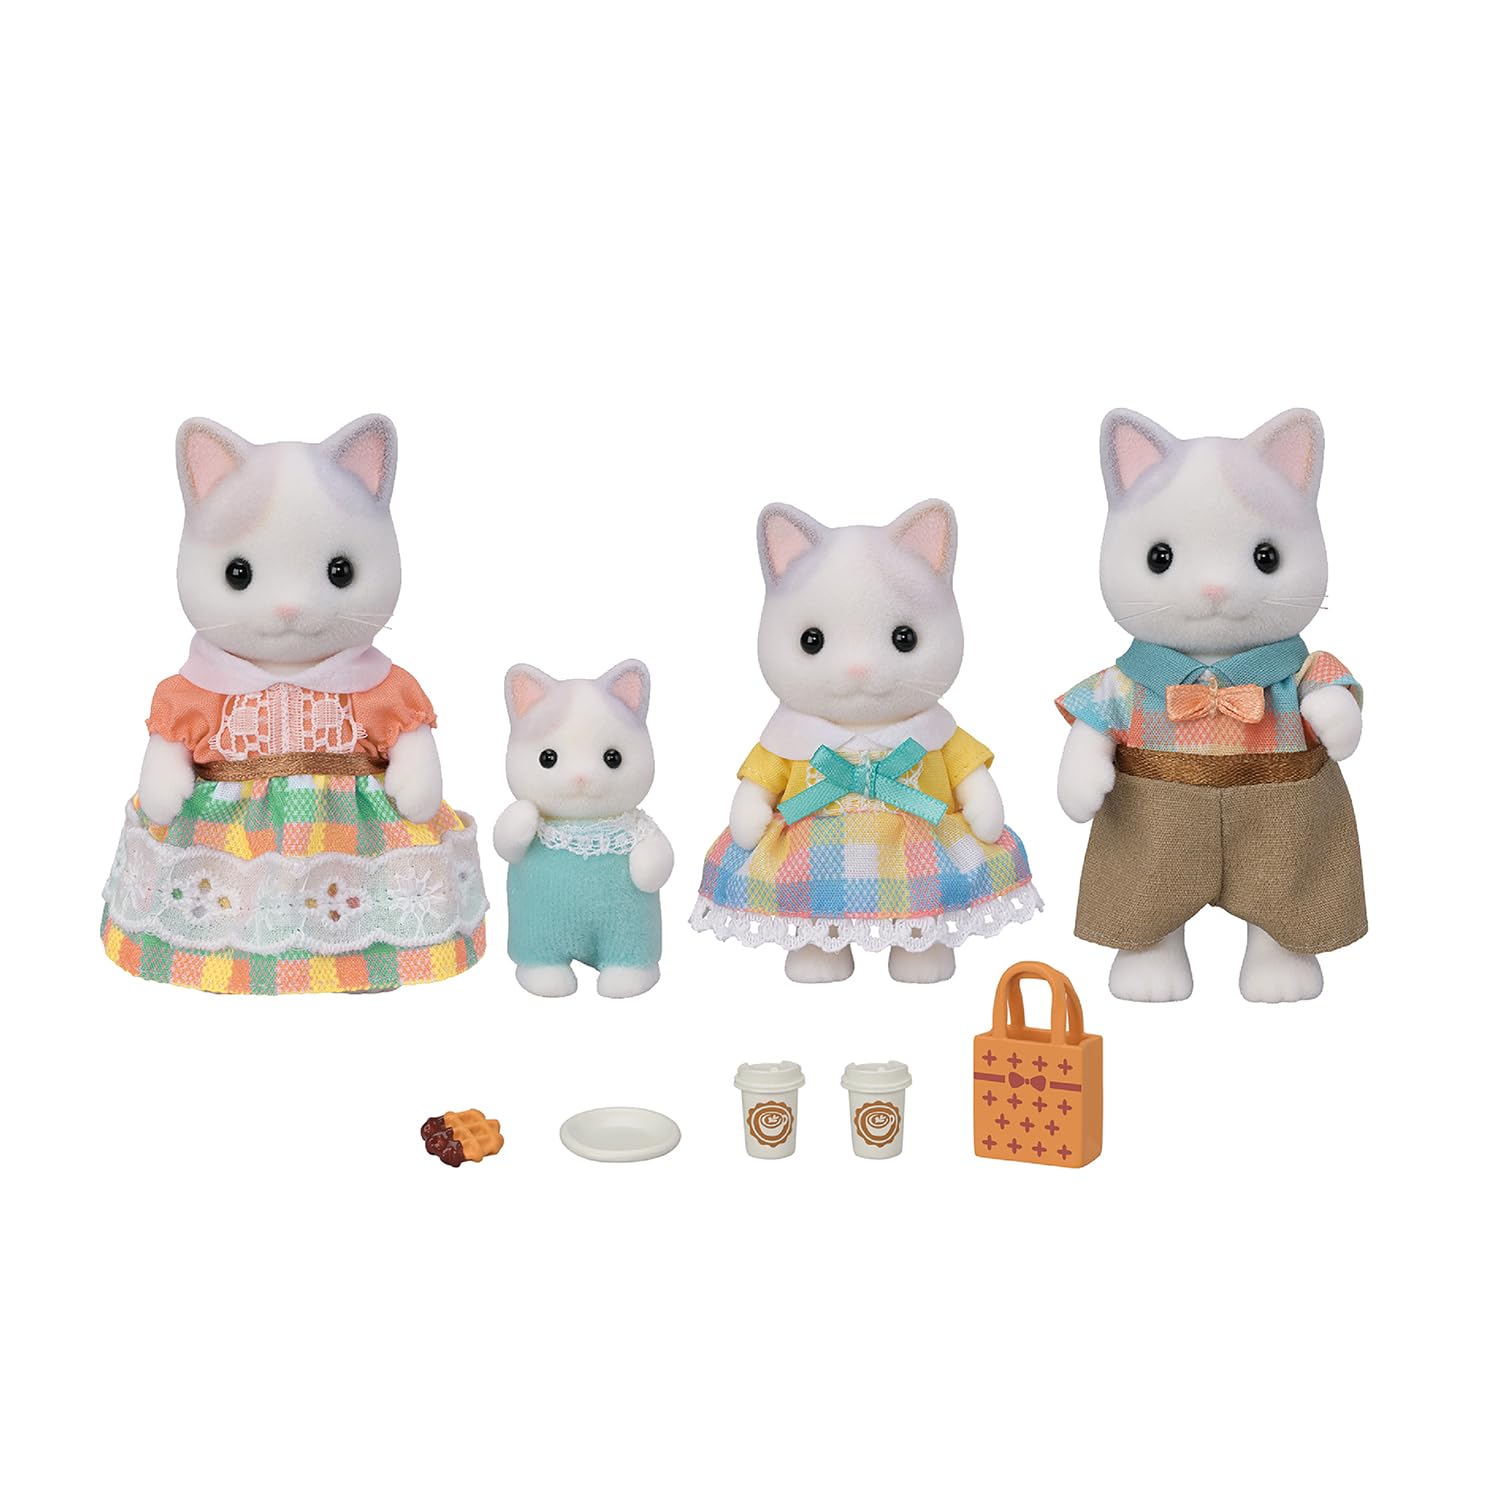 Calico Critters Latte Cat Family - Set of 4 Collectible Doll Figures for Ages 3+